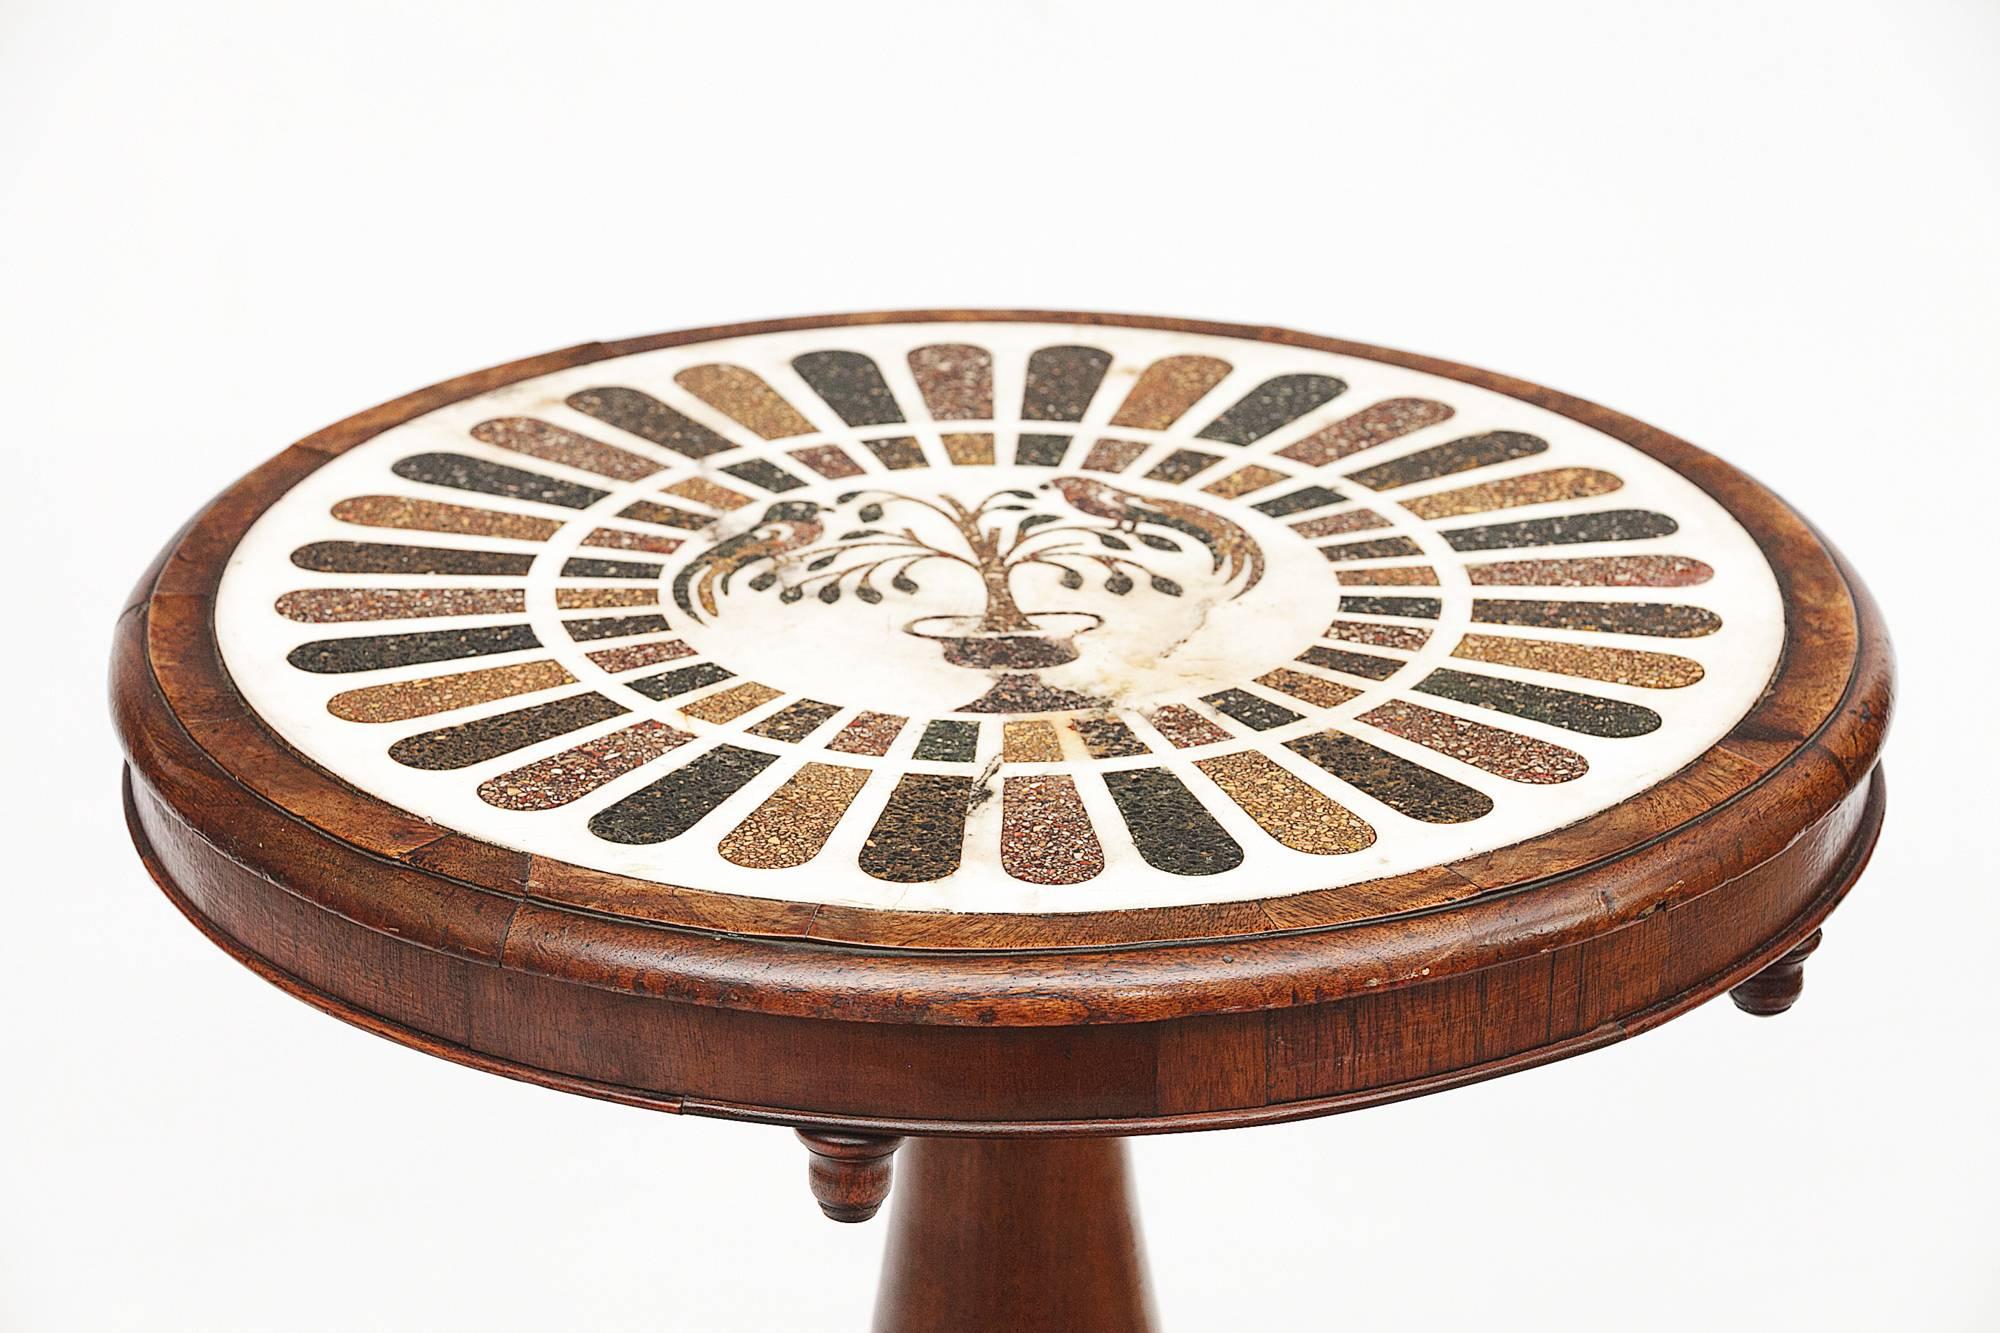 Early 19th century George III marble-top inlaid mahogany table, with stone mosaic depicting two birds in a tree, above turned central pillar on tripod base with paw feet.